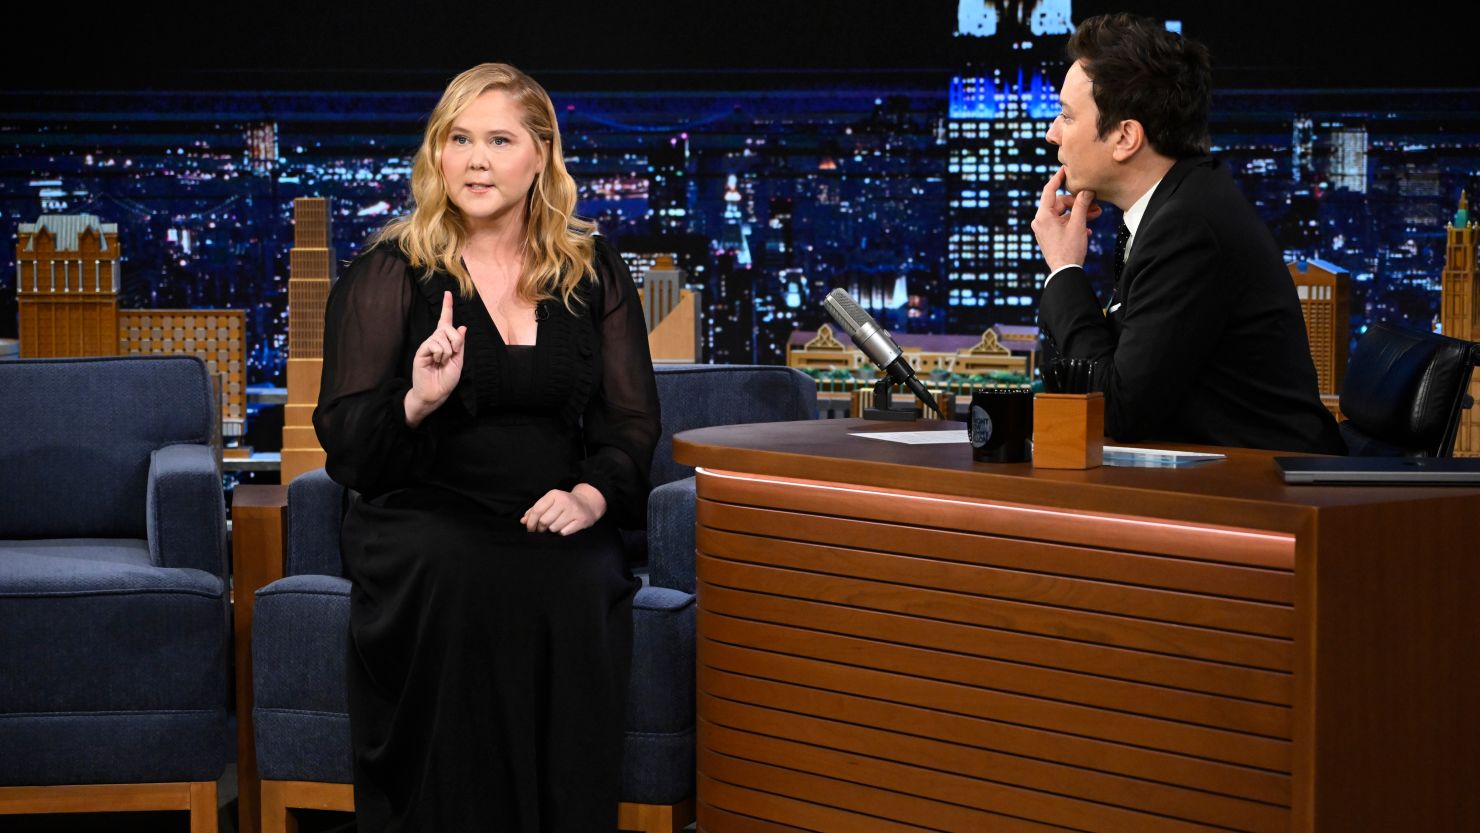 Amy Schumer Shares A Health Update After Concerns About Her Appearance On The Tonight Show with Jimmy Fallon.